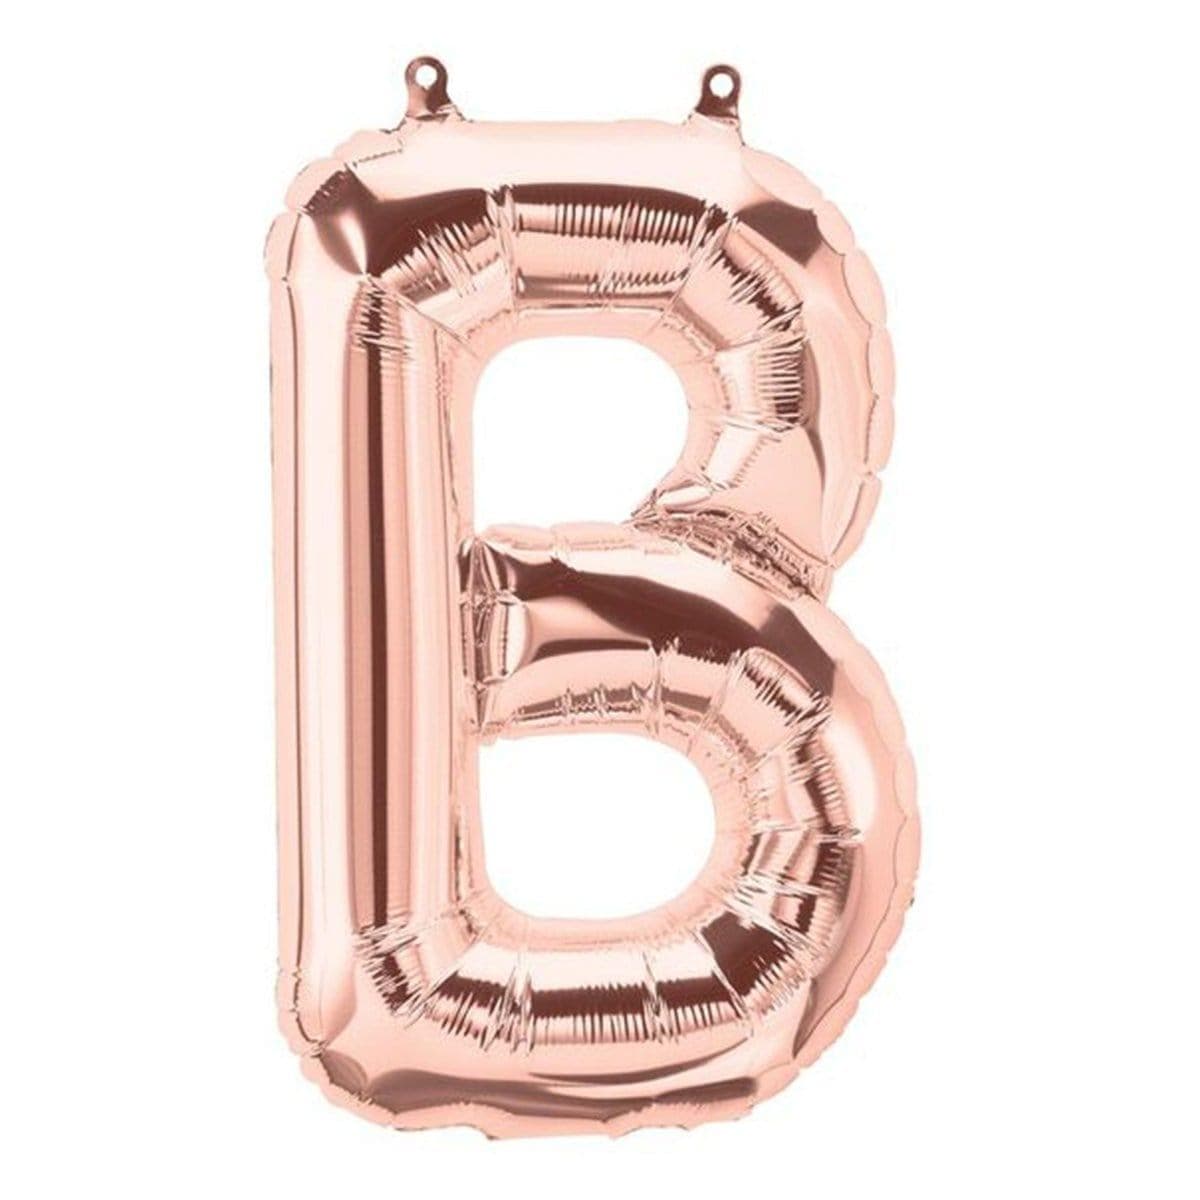 Buy Balloons Rose Gold Letter B Foil Balloon, 34 Inches sold at Party Expert